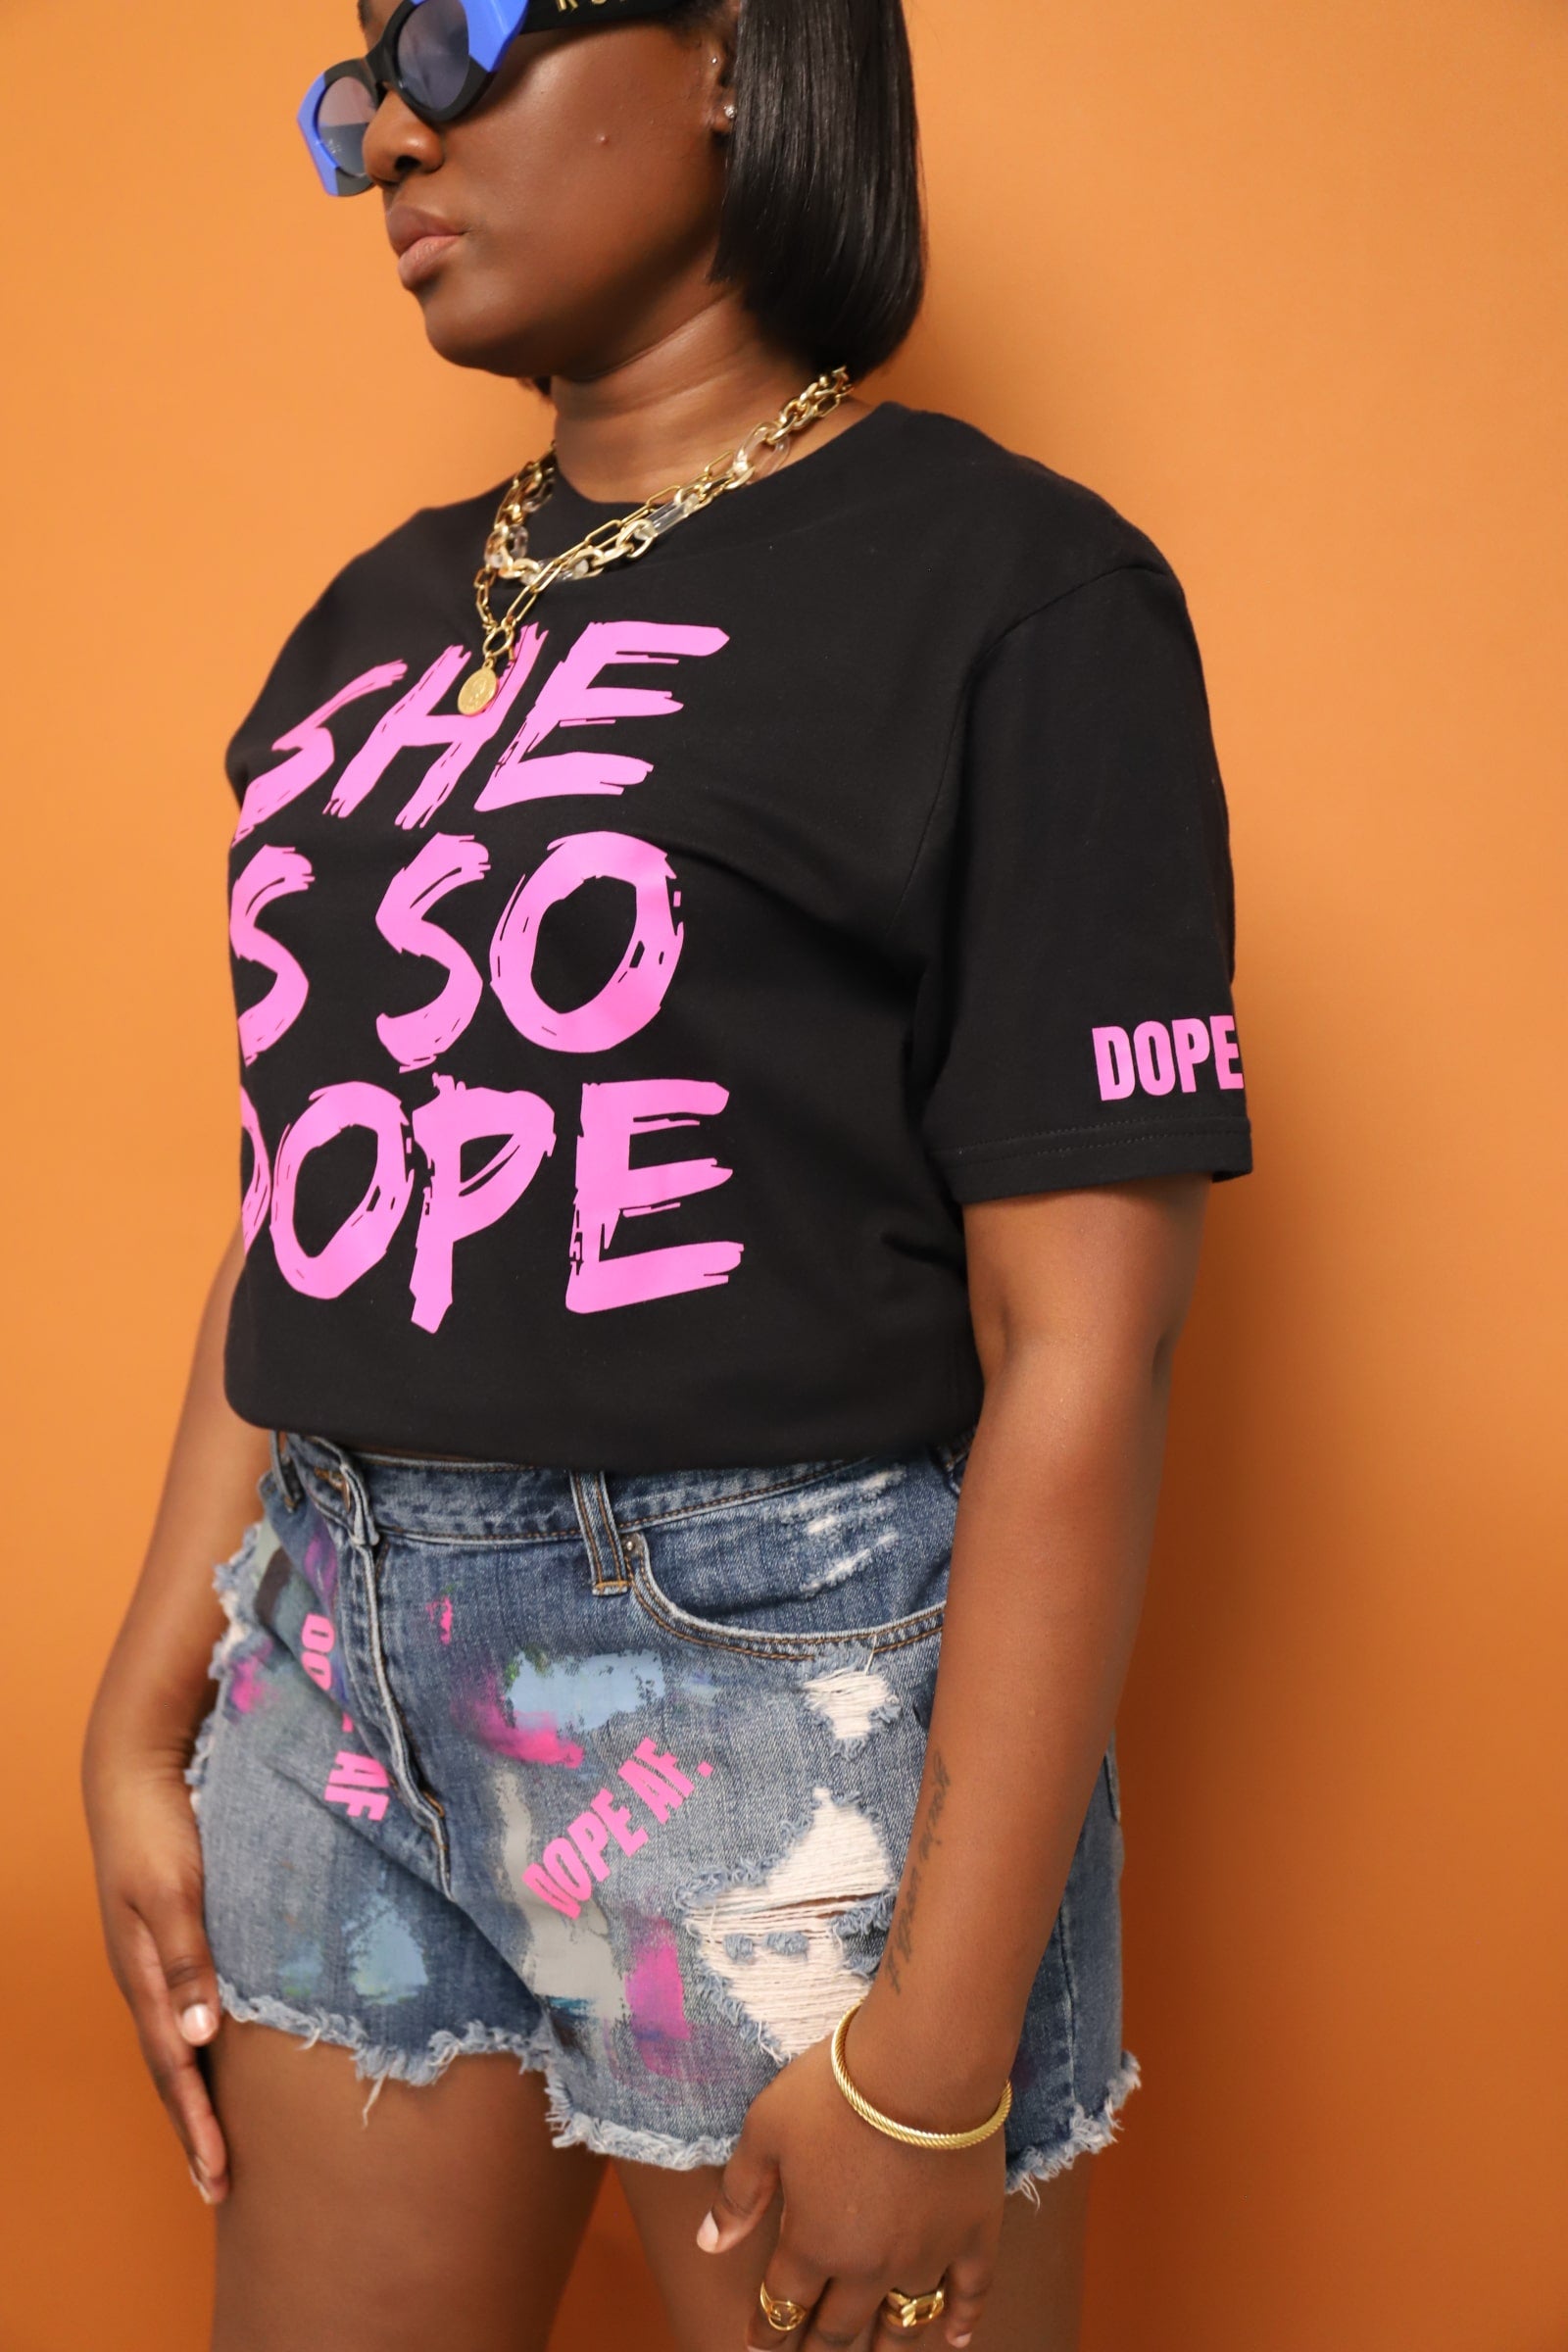 She Is So Dope Shirt In Hot Pink